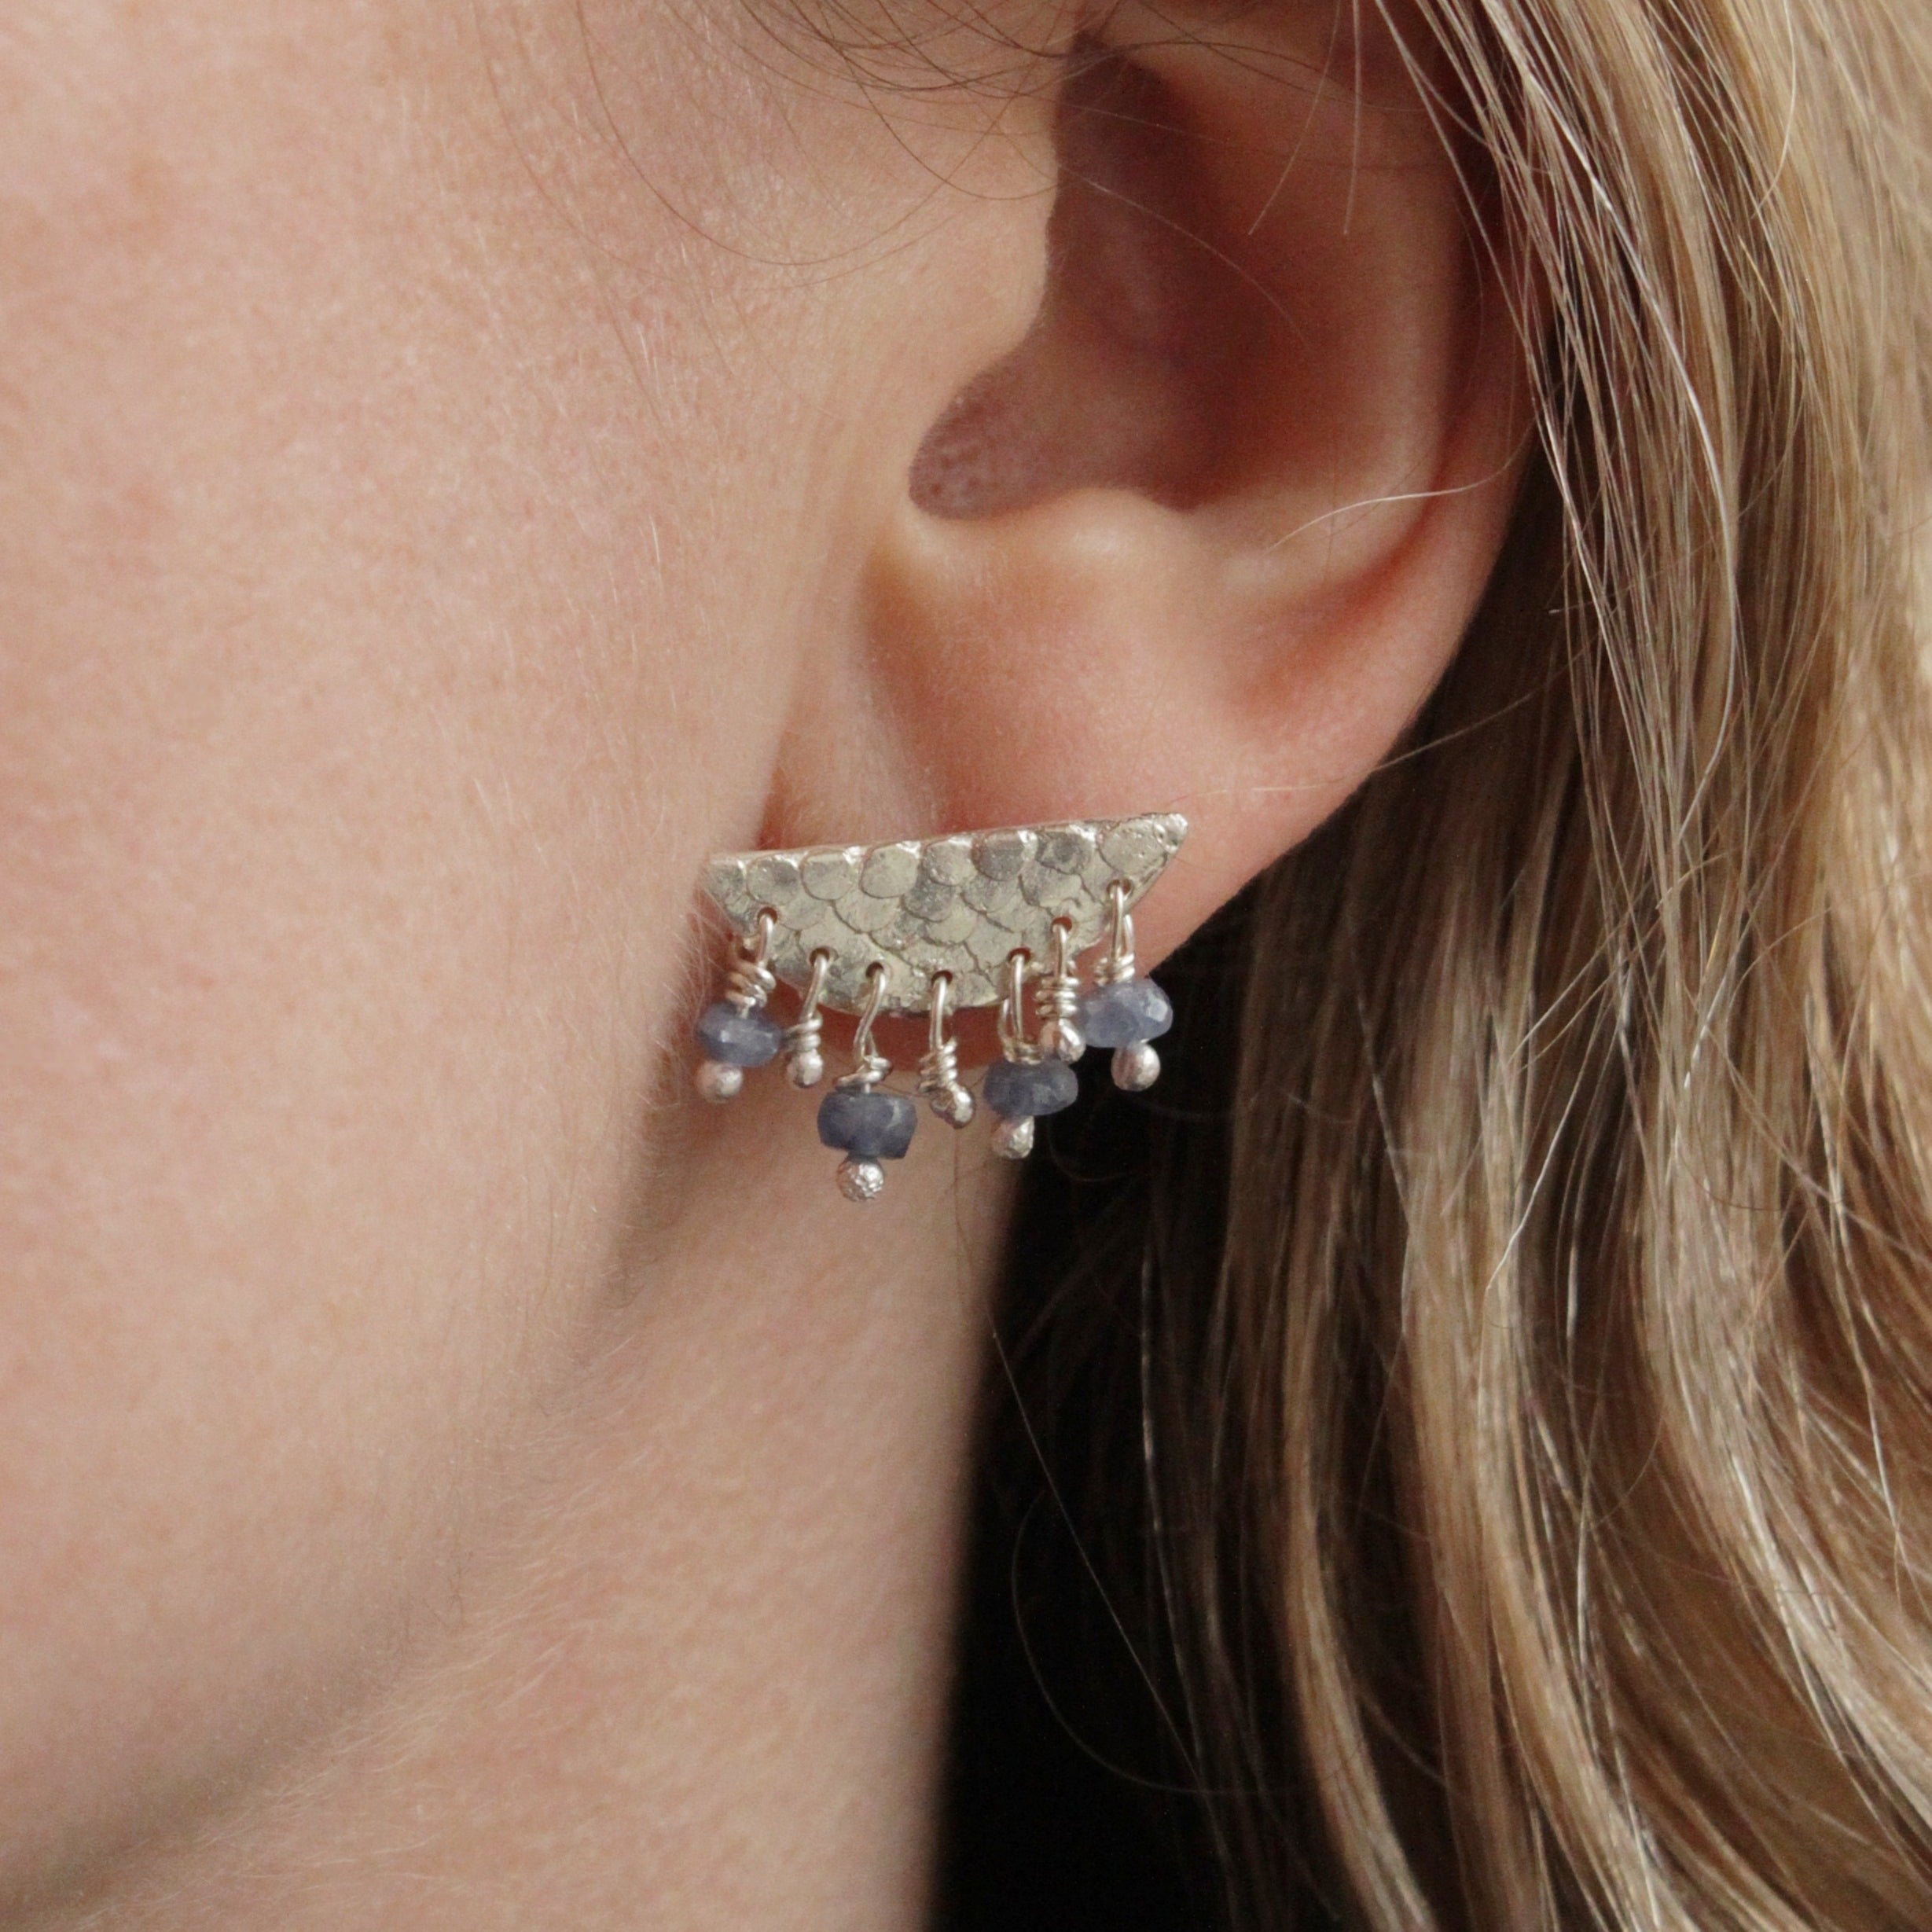 A fresh new take on the Manifest earrings from the Epiphany collection. These delicate studs feature intricate mermaid details and blue Sapphire beads that create a gorgeous movement when worn.